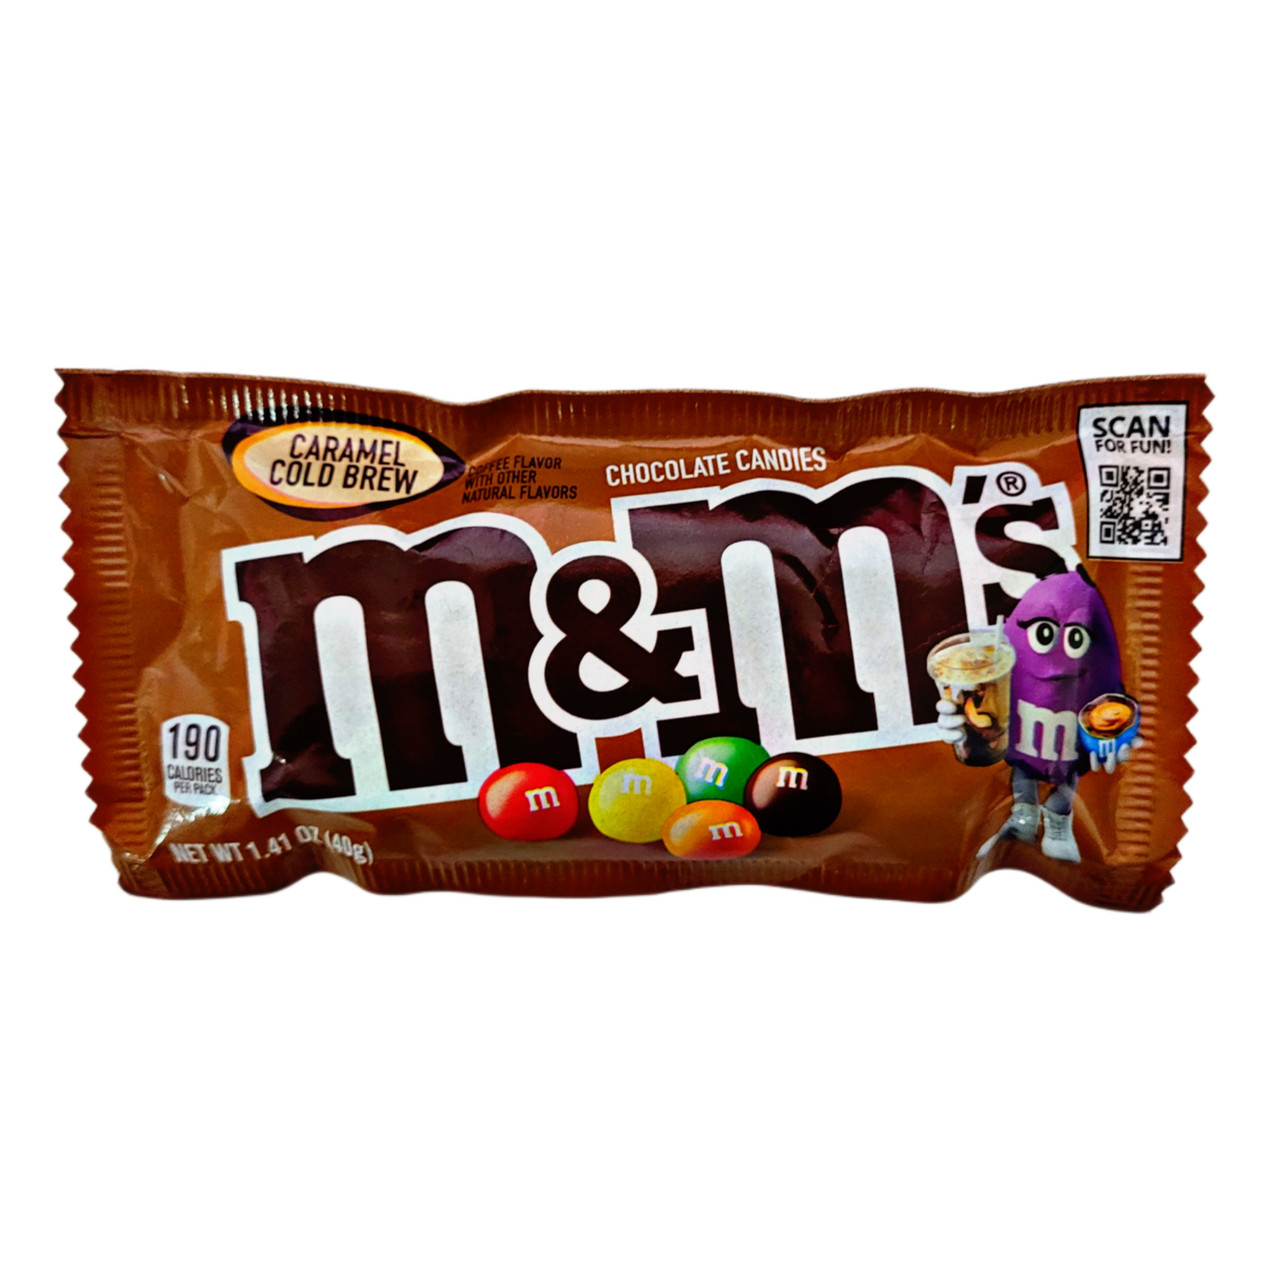 M&Ms Caramel Cold Brew Coffee Candy, Pack of 3 (1.41 oz each) - Milk  Chocolate Candy with Cold Brew Coffee flavored Caramel, Office Snacks,  Coffee